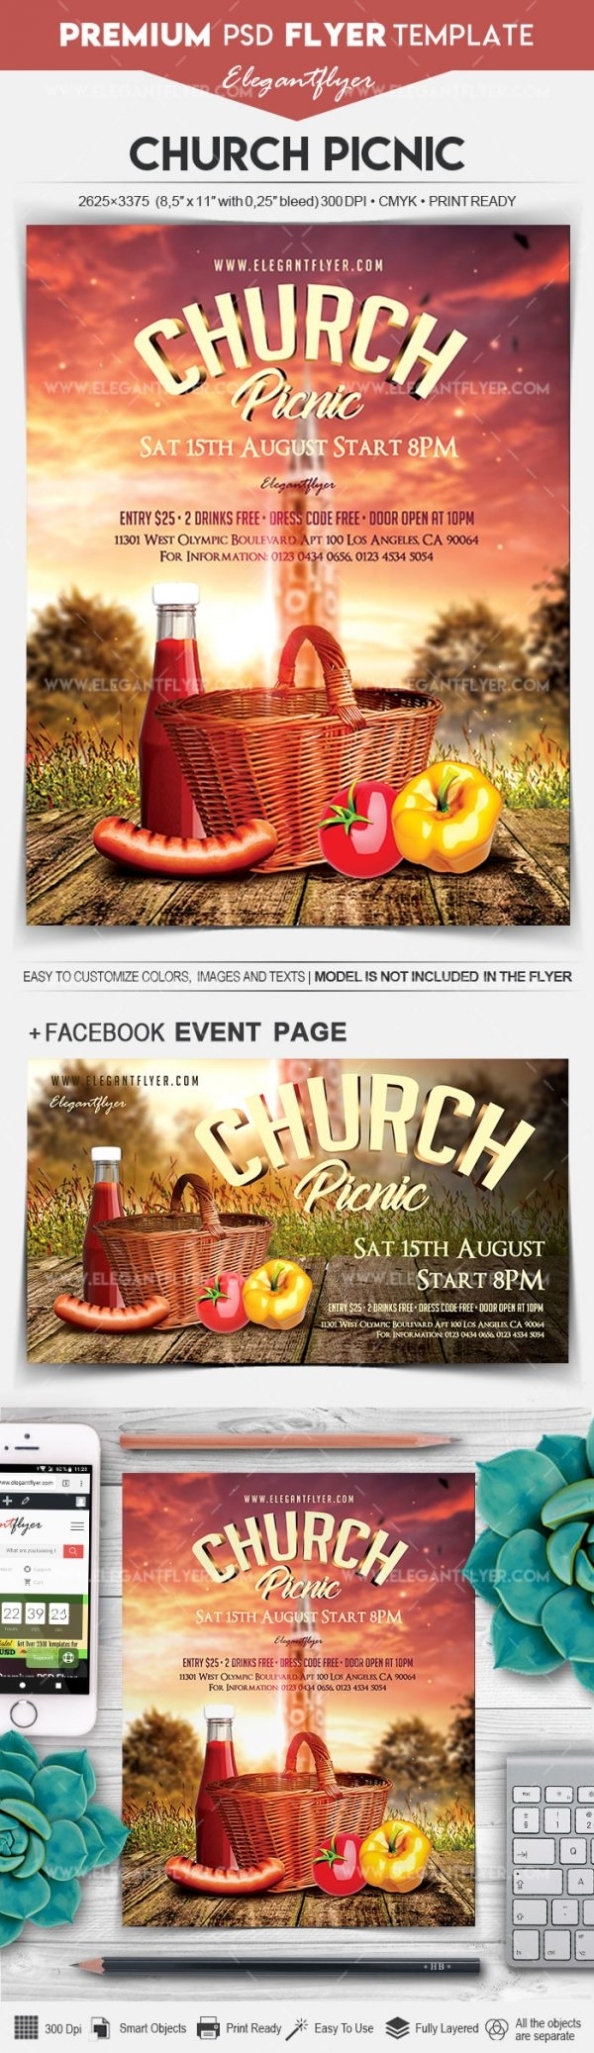 Church Picnic - Flyer Psd Template | By Elegantflyer Regarding Church Picnic Flyer Templates